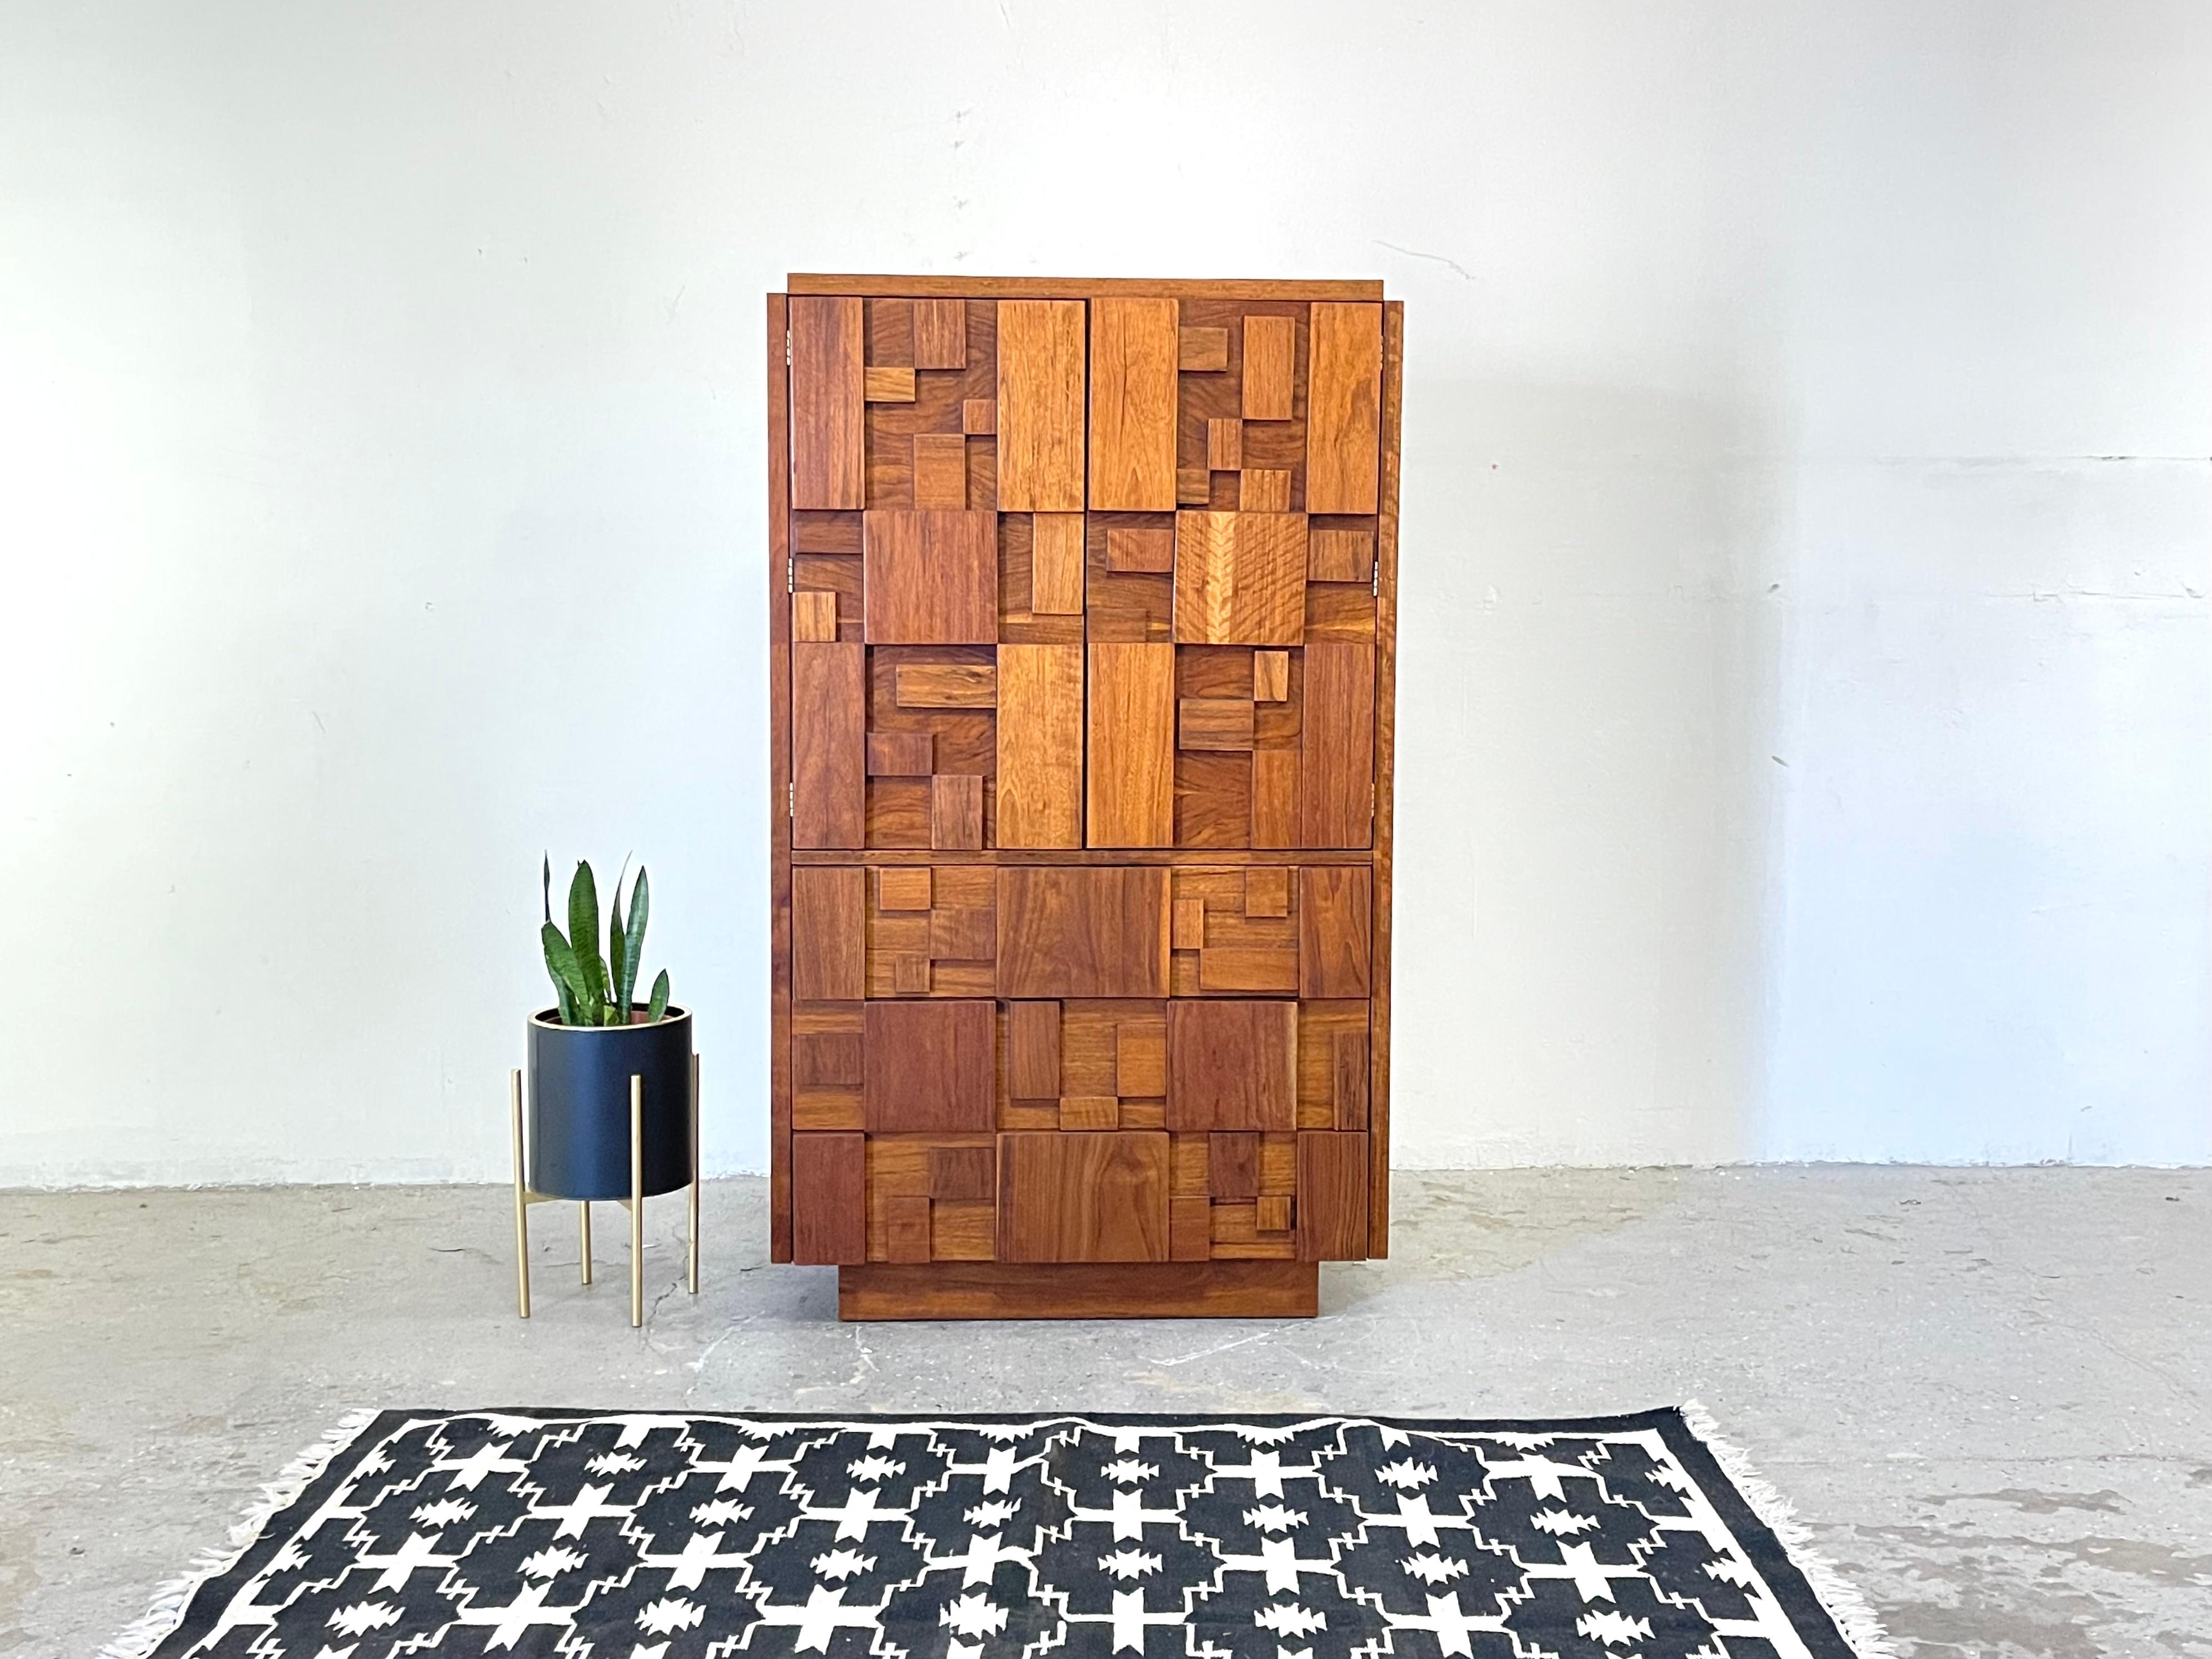 Vintage Mid-Century Modern brutalist armoire dresser from the “Staccato” line by Lane Furniture Company. Raised block front Brutalist style and period. The dresser, armoire, has two doors which open to reveal a lower drawer and open shelved storage.